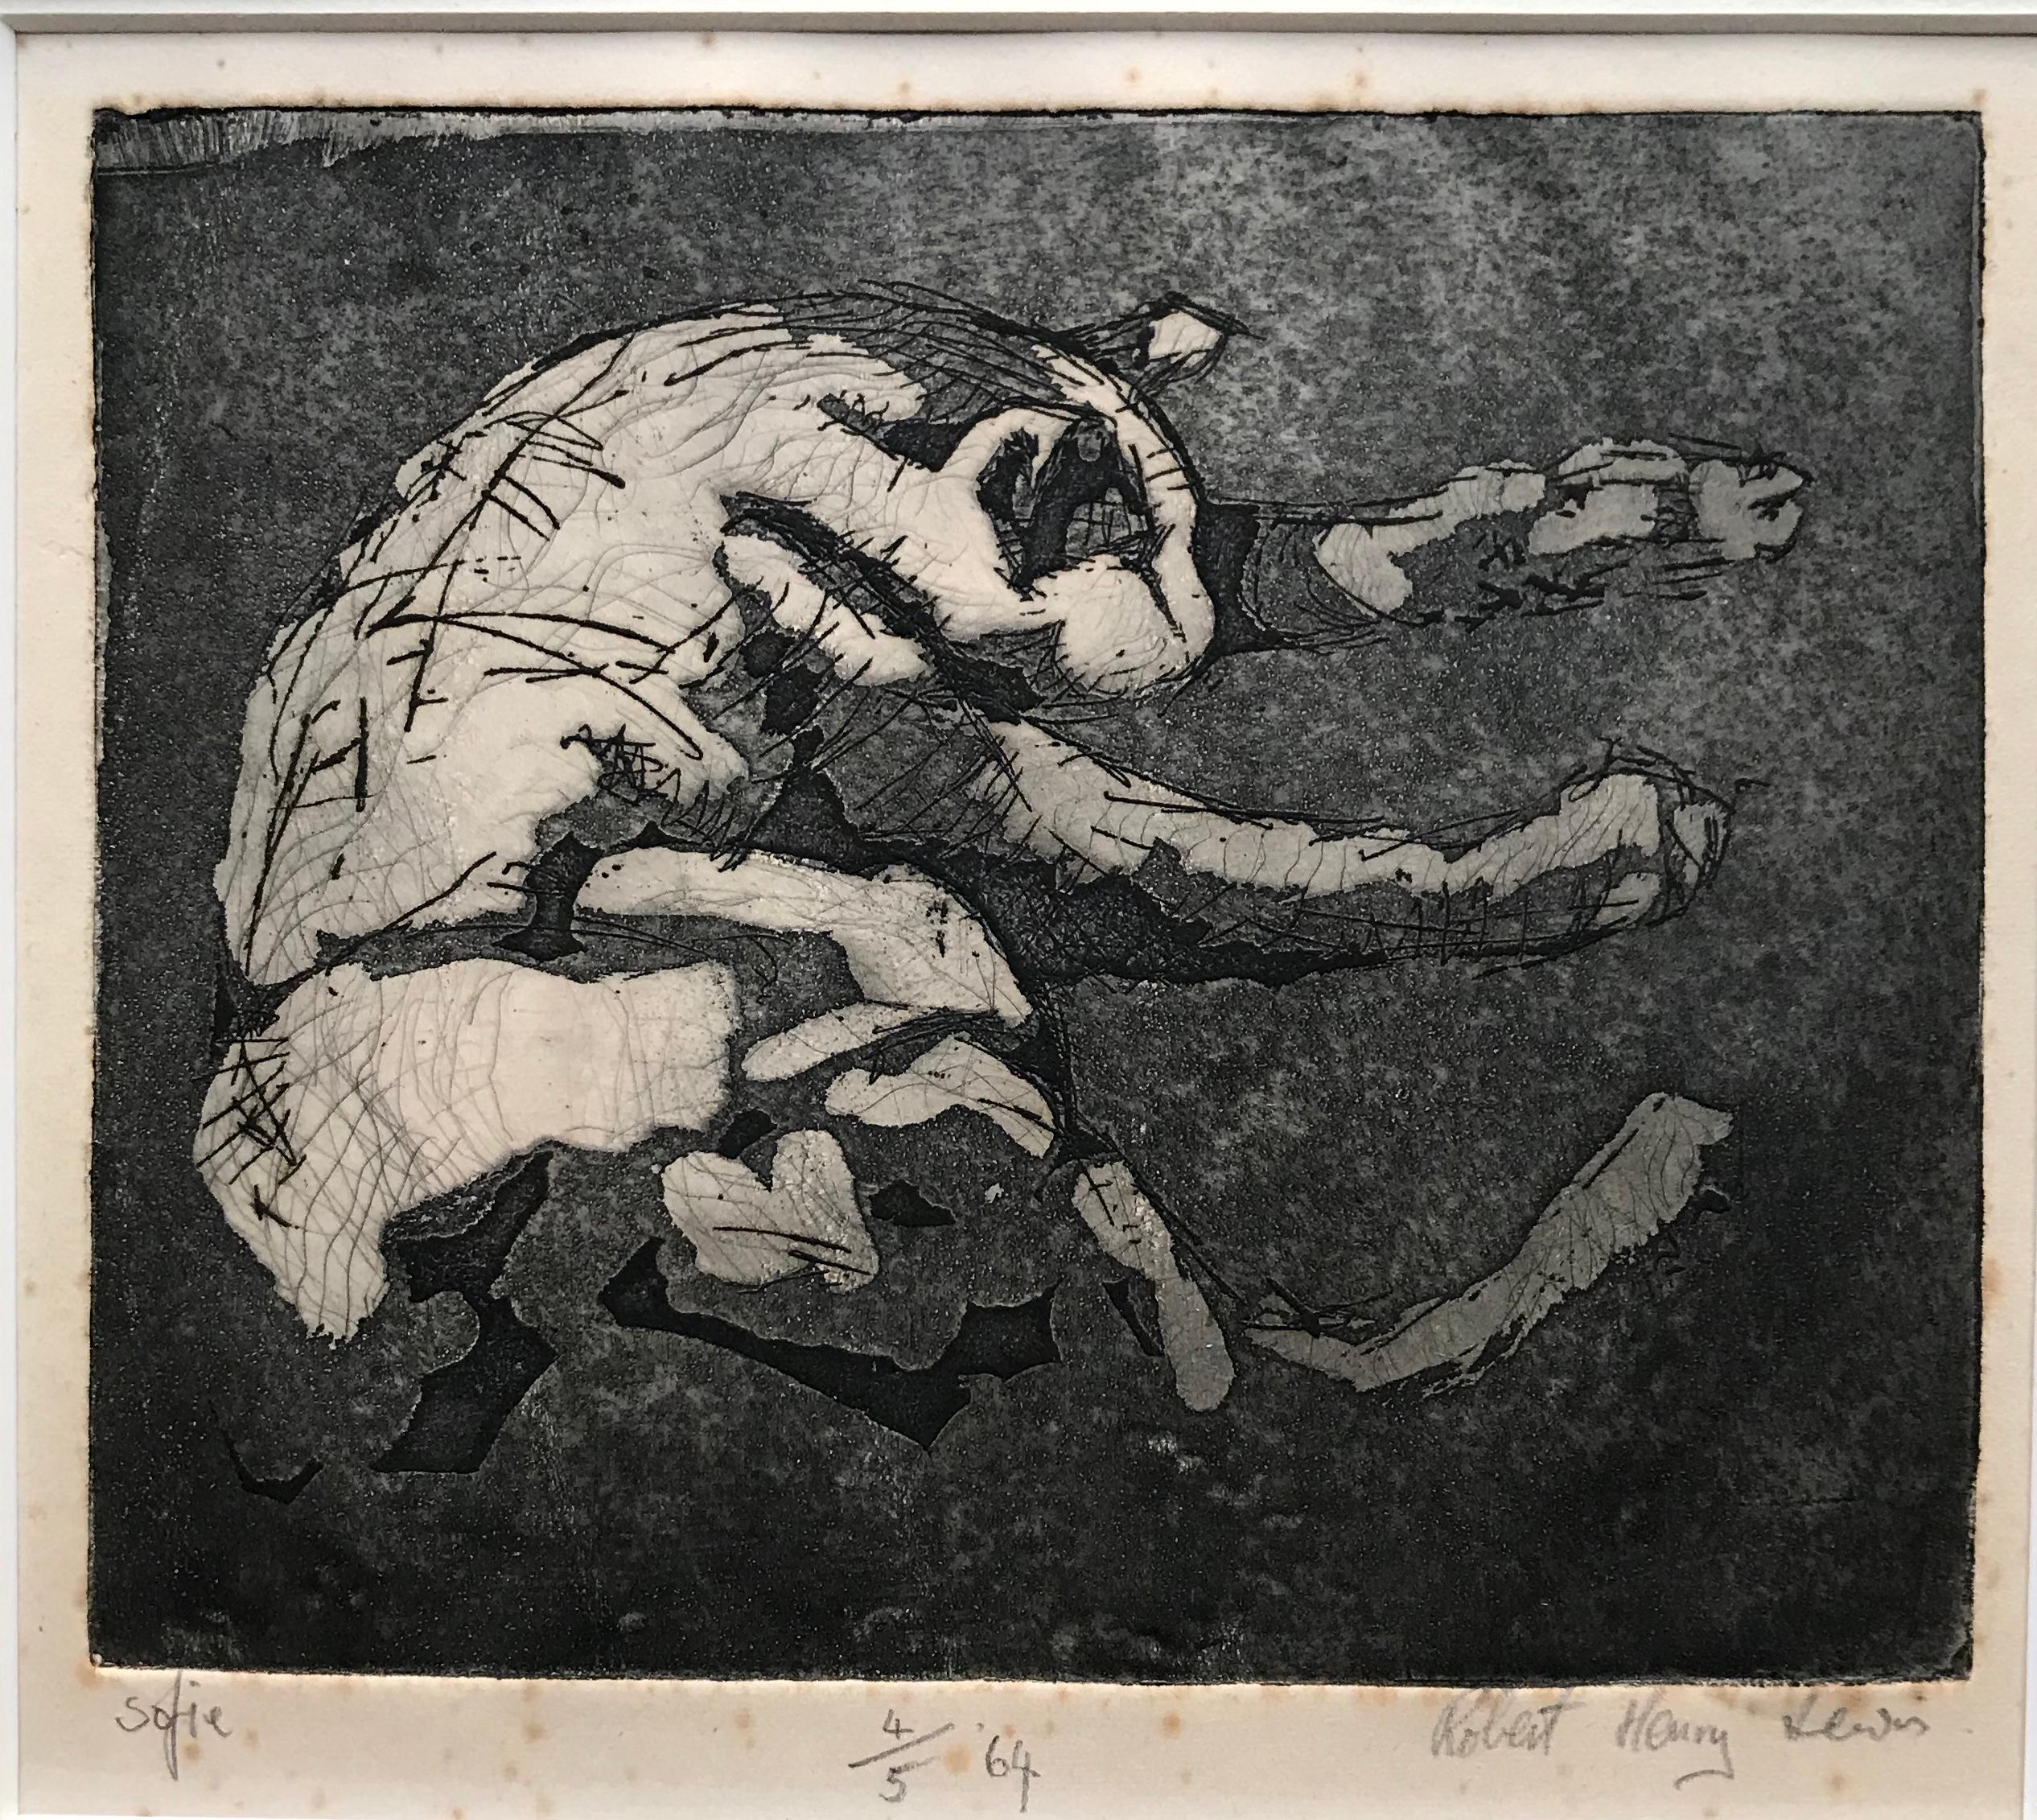 Robert Henry Lewis, Modernist etching of Sofie the sleeping cat